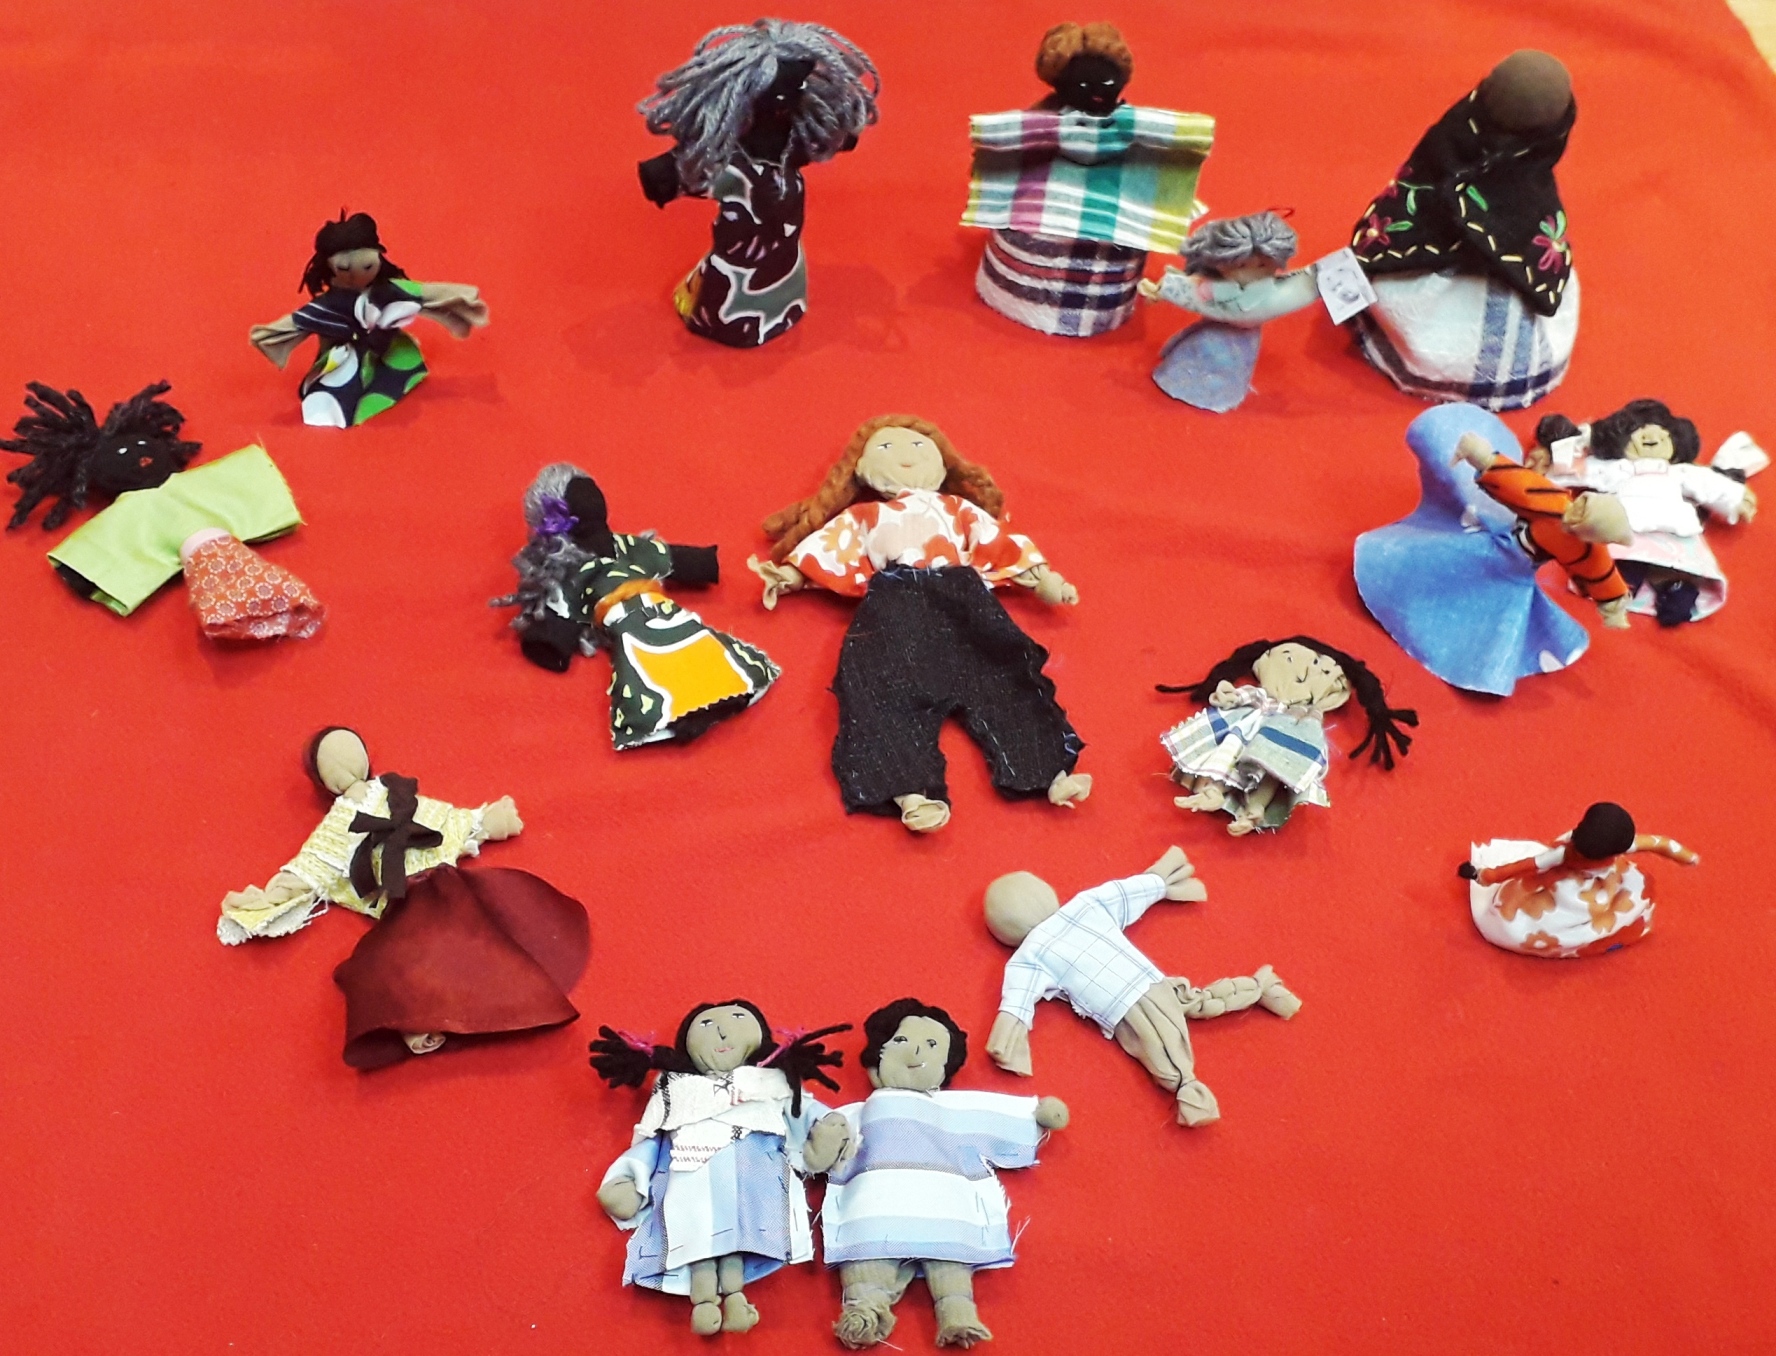 Arpillera dolls made by participants during the workshop facilitated by Roberta Bacic. (Photo: Jimena Pardo)